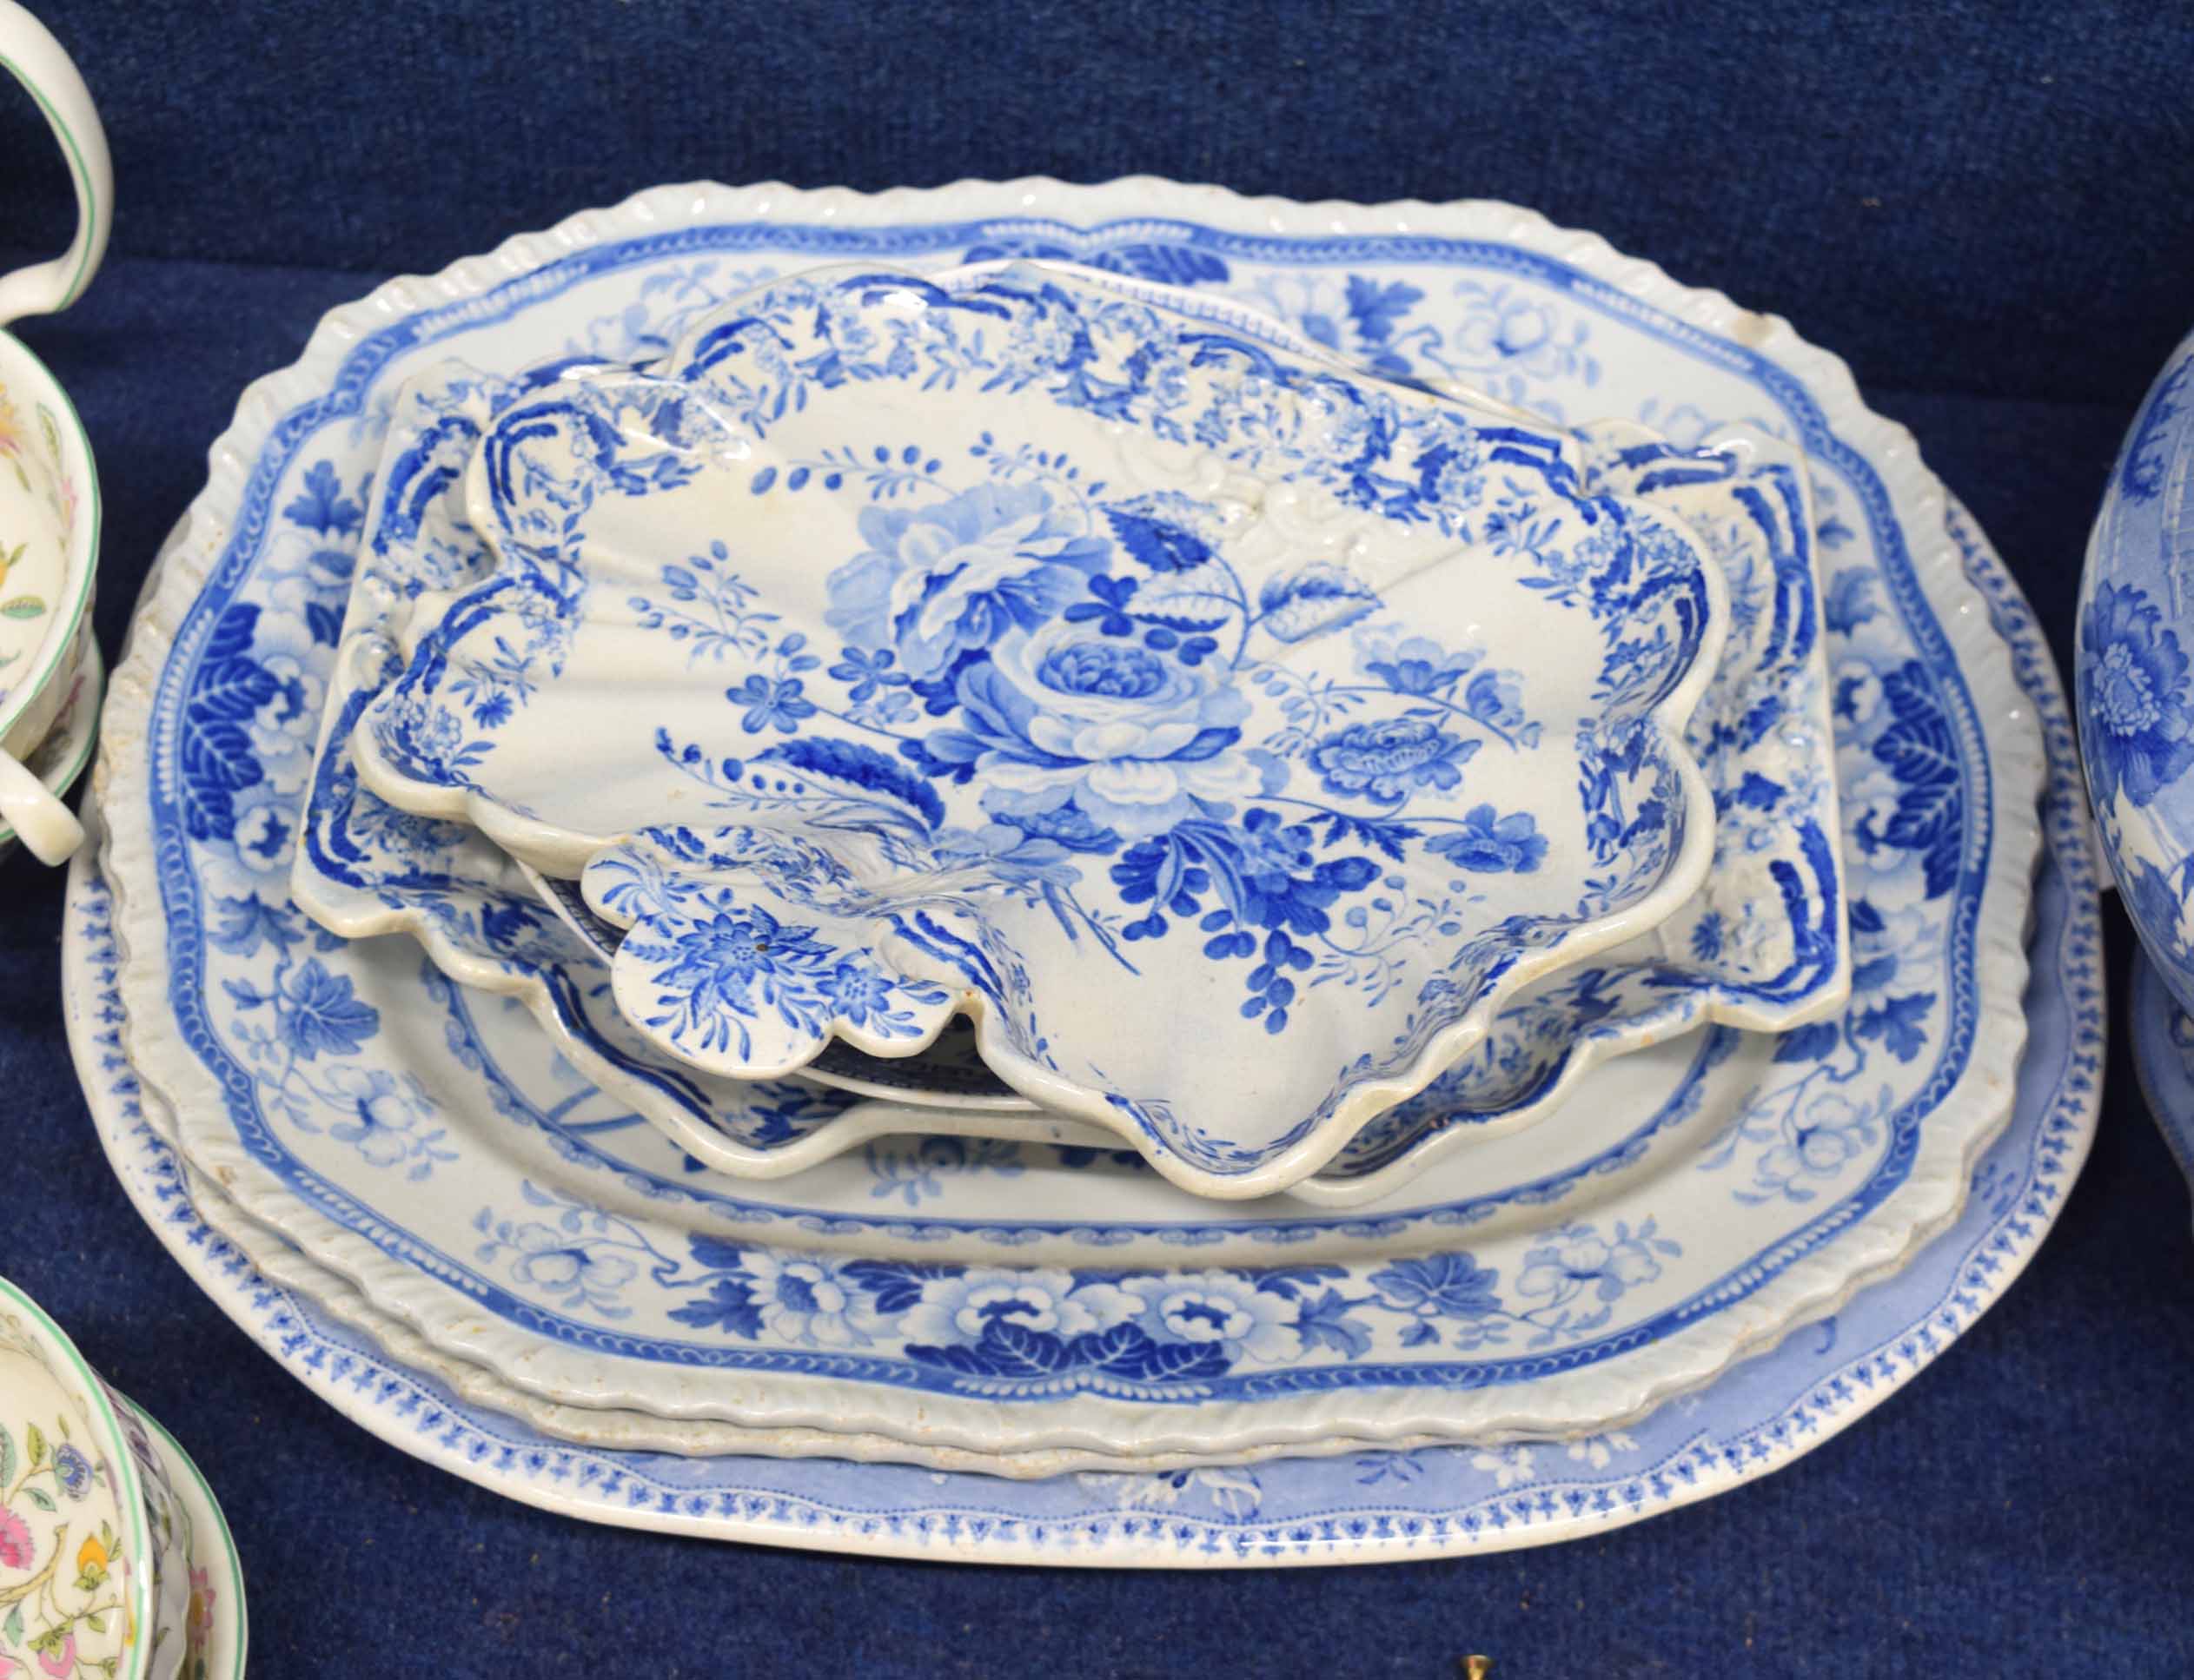 Collection of blue and white wares including a Miles Mason dish, two larger dishes with a floral